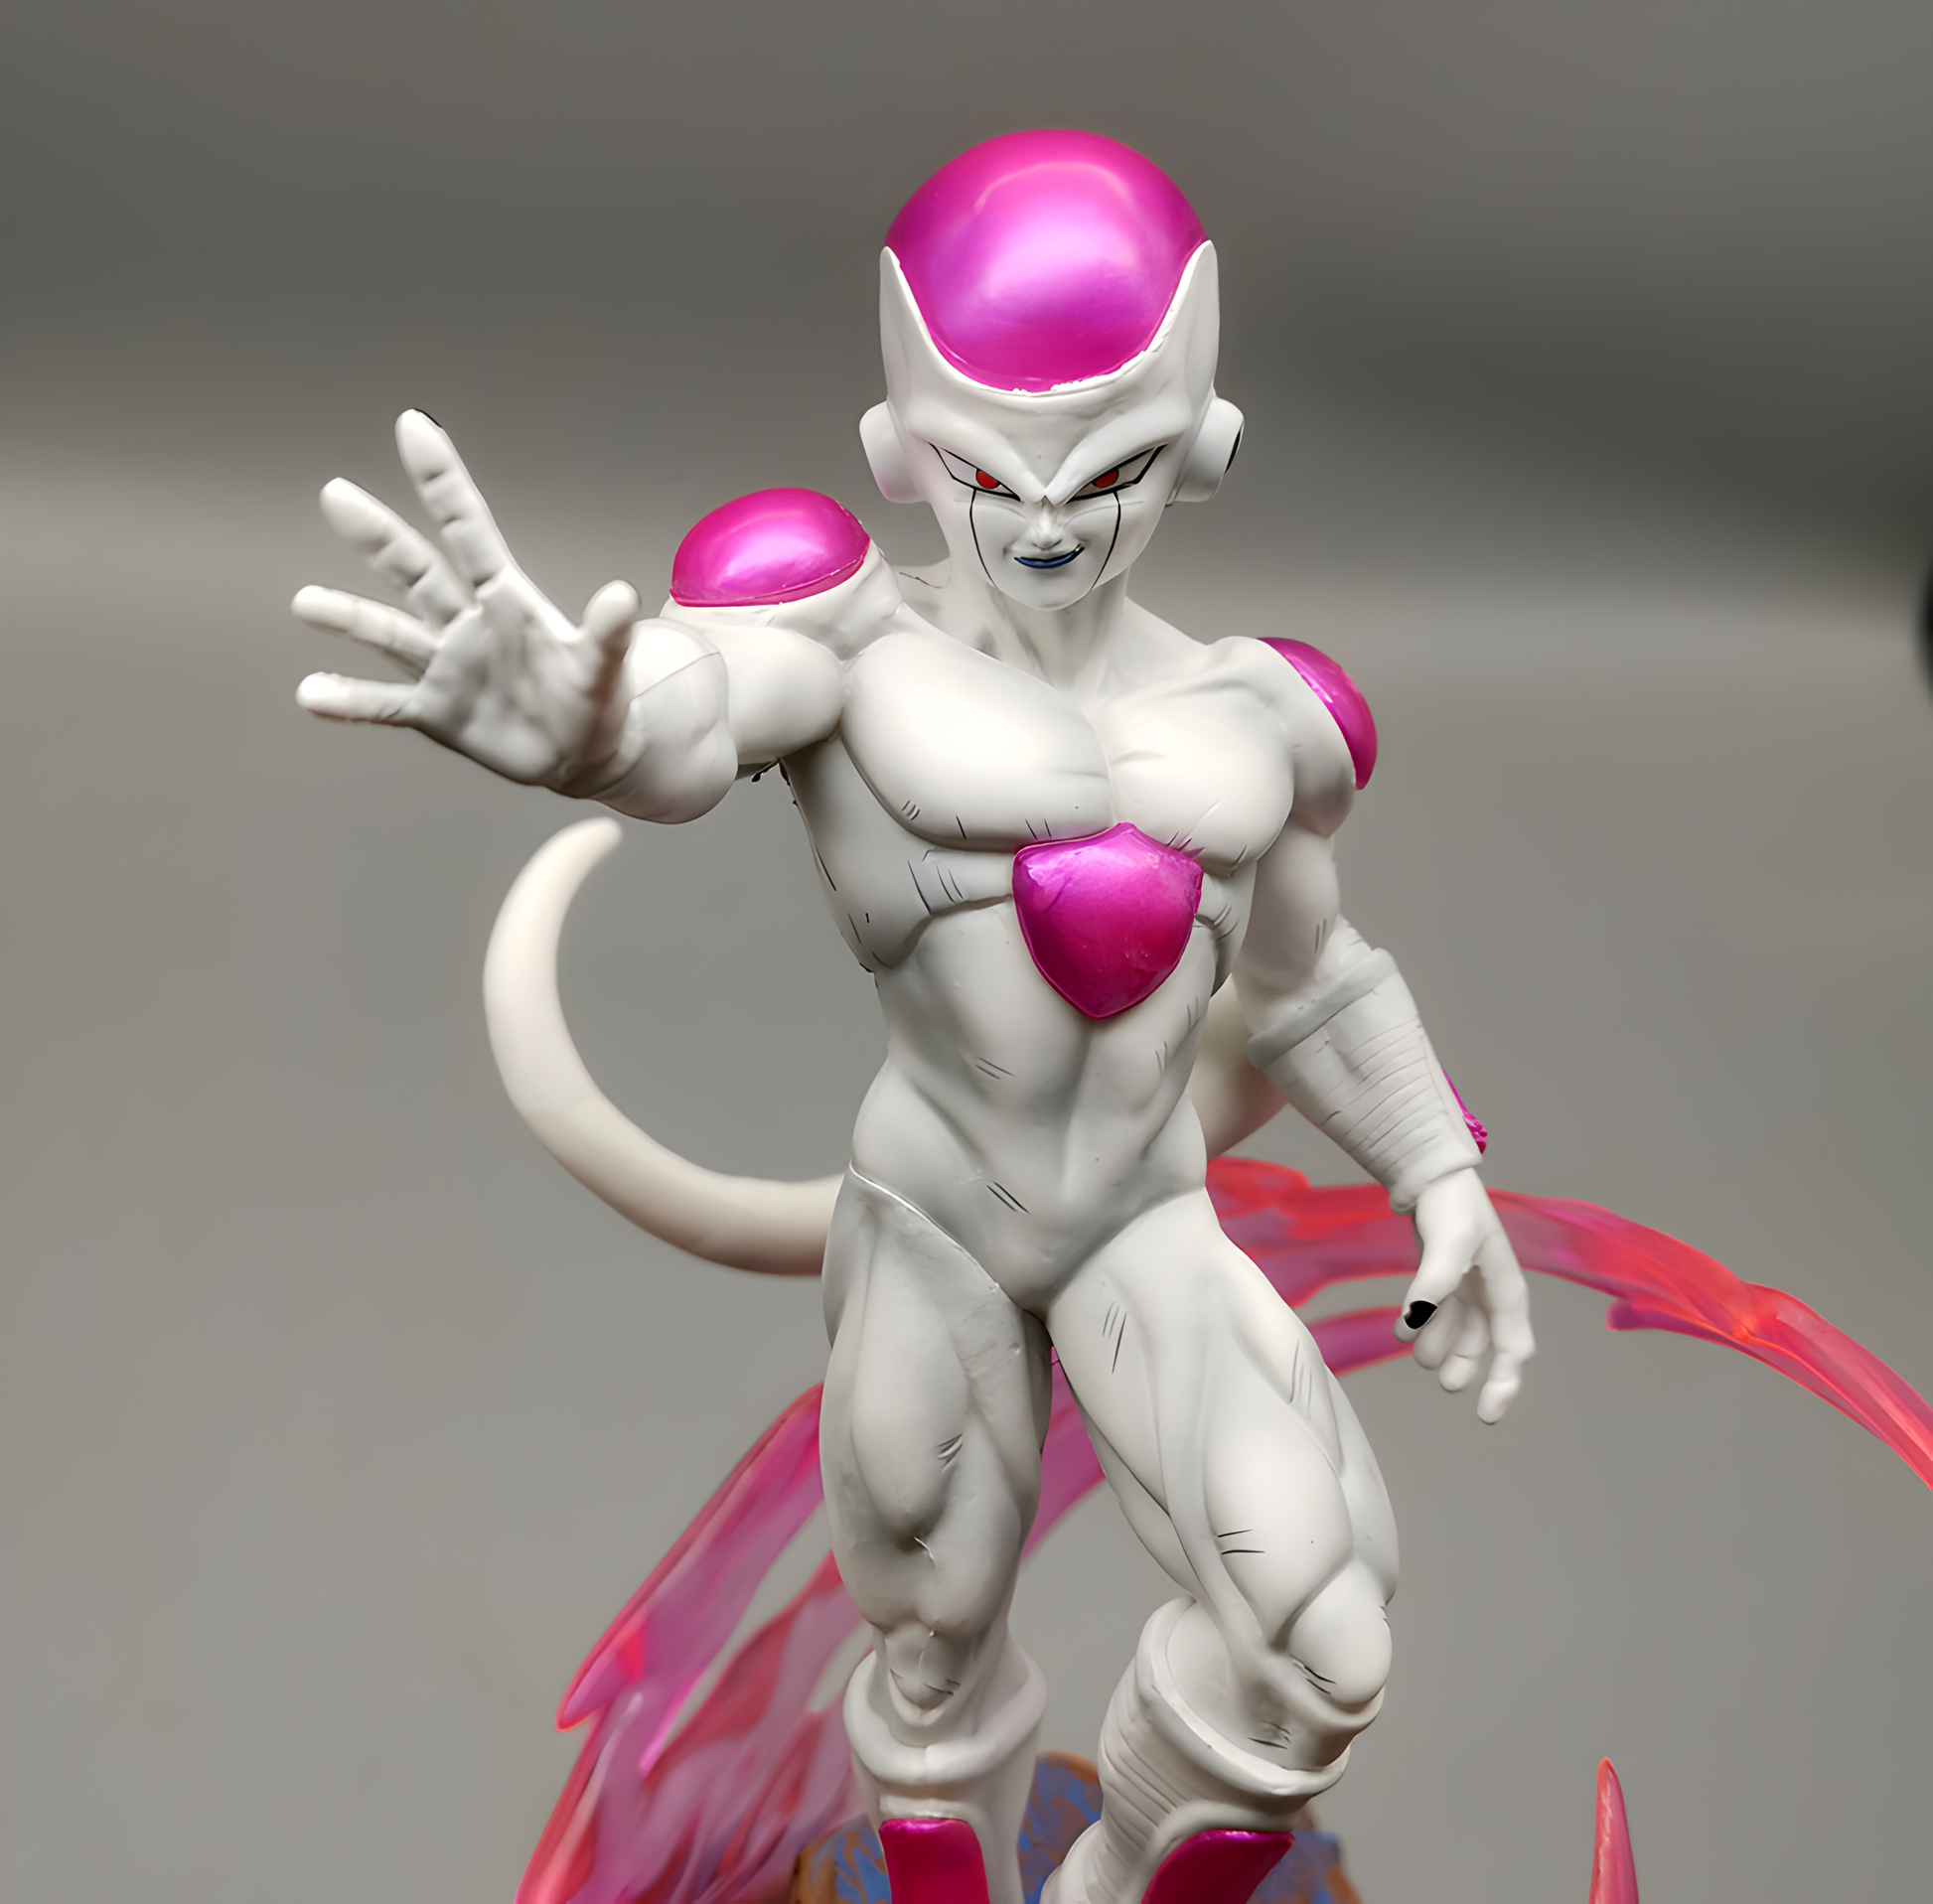 Close-up of the detailed Frieza action figure from Dragon Ball Z, emphasizing his imposing stare and the pink accents of his supernatural energy.